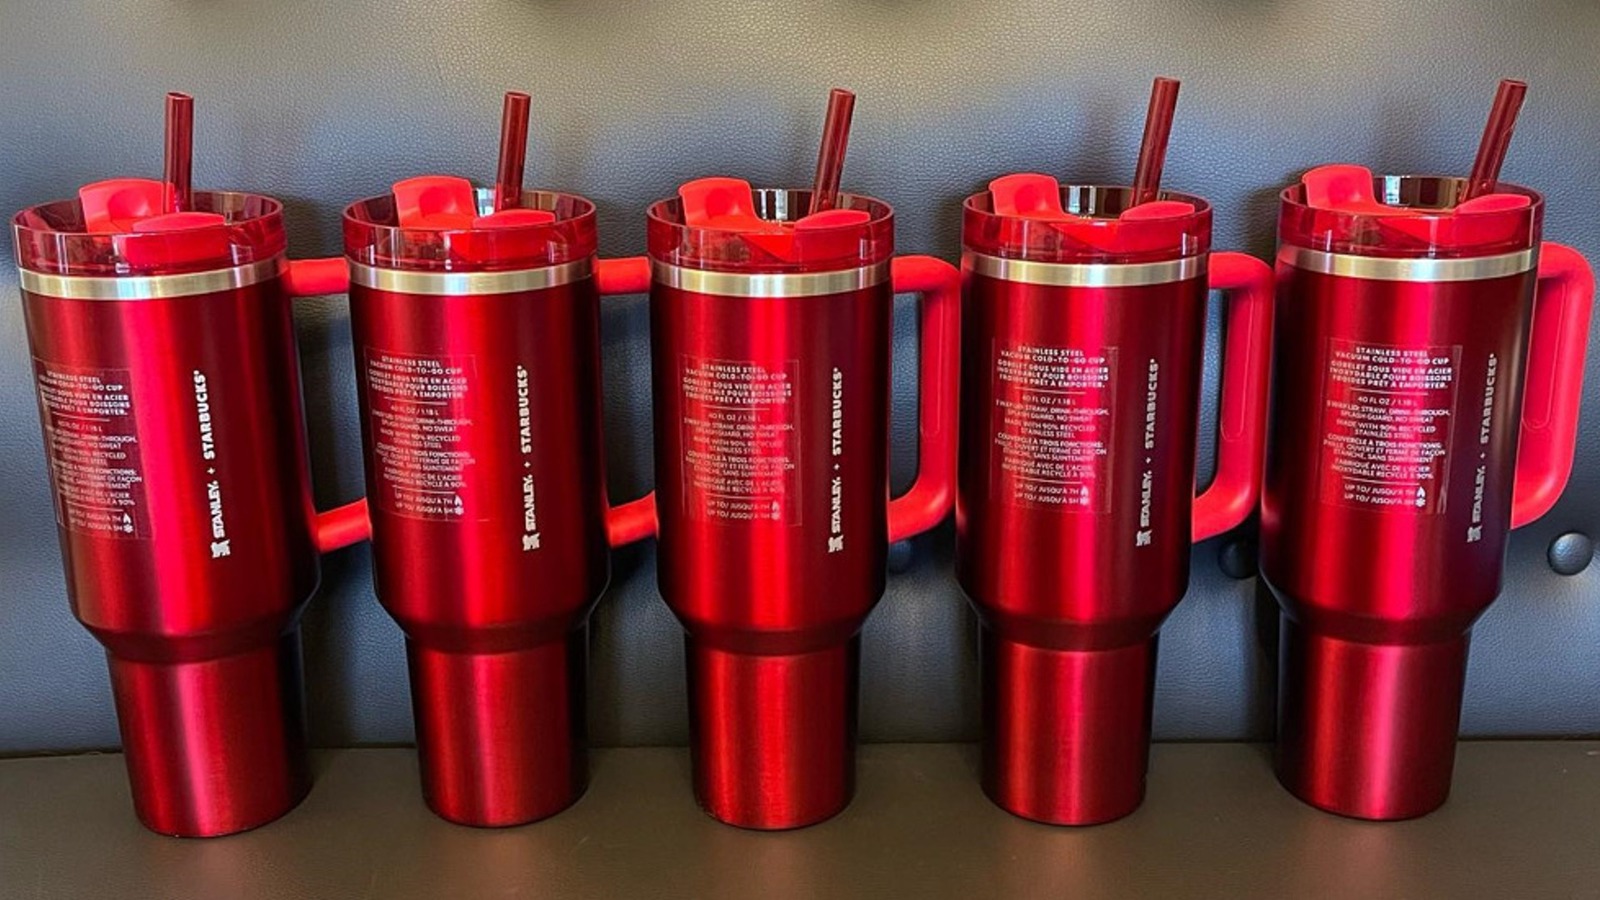 https://www.tastingtable.com/img/gallery/starbucks-cherry-red-stanley-cups-are-selling-fast-and-already-being-resold/l-intro-1699045796.jpg